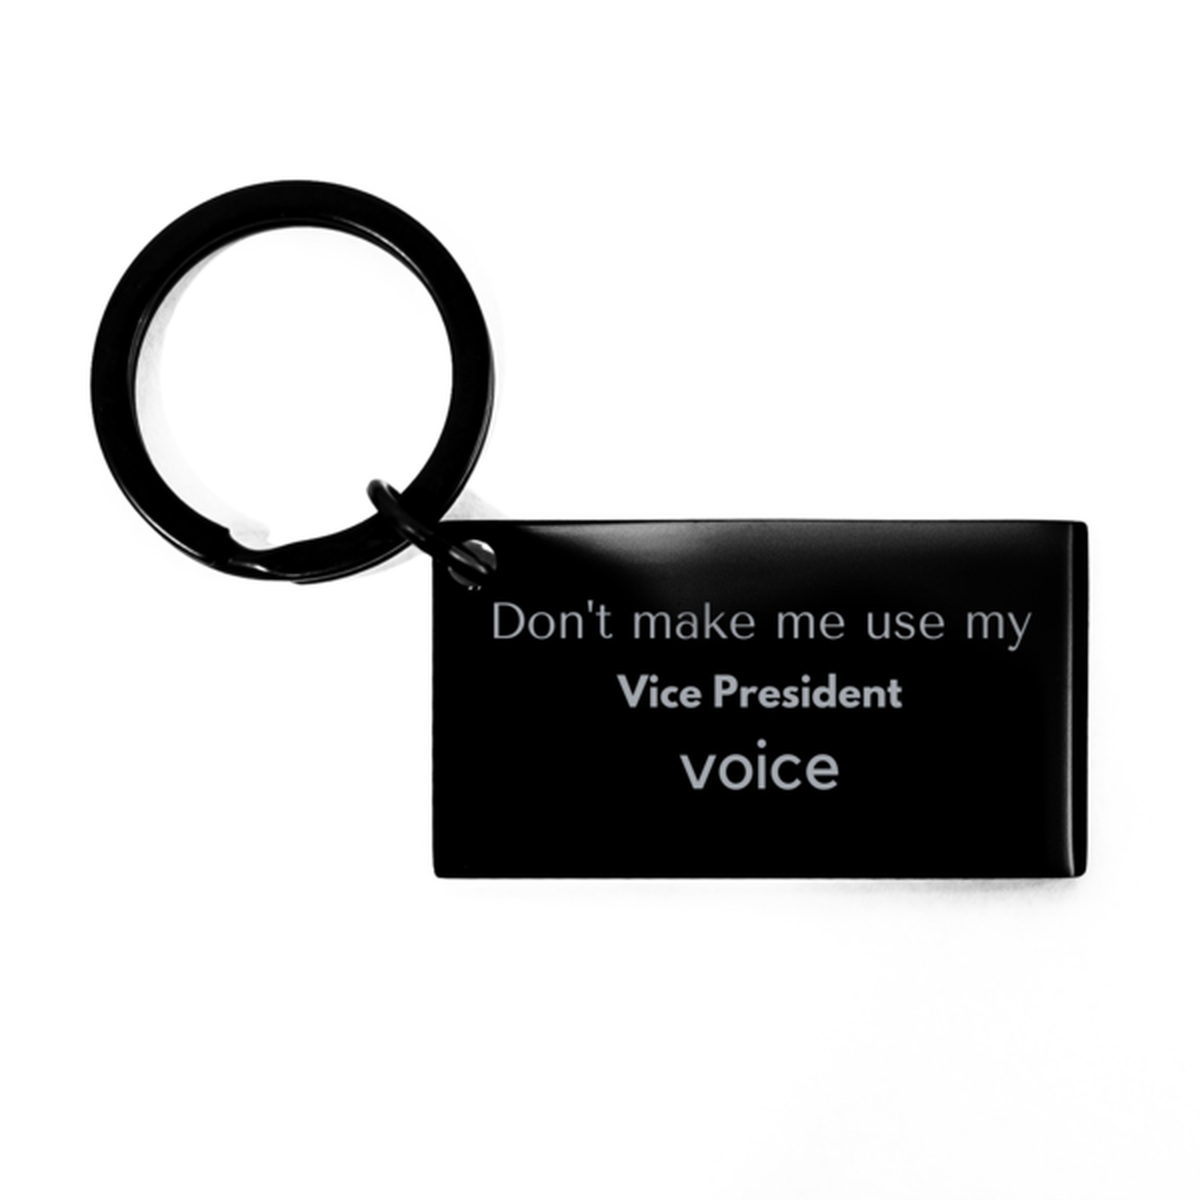 Don't make me use my Vice President voice, Sarcasm Vice President Gifts, Christmas Vice President Keychain Birthday Unique Gifts For Vice President Coworkers, Men, Women, Colleague, Friends